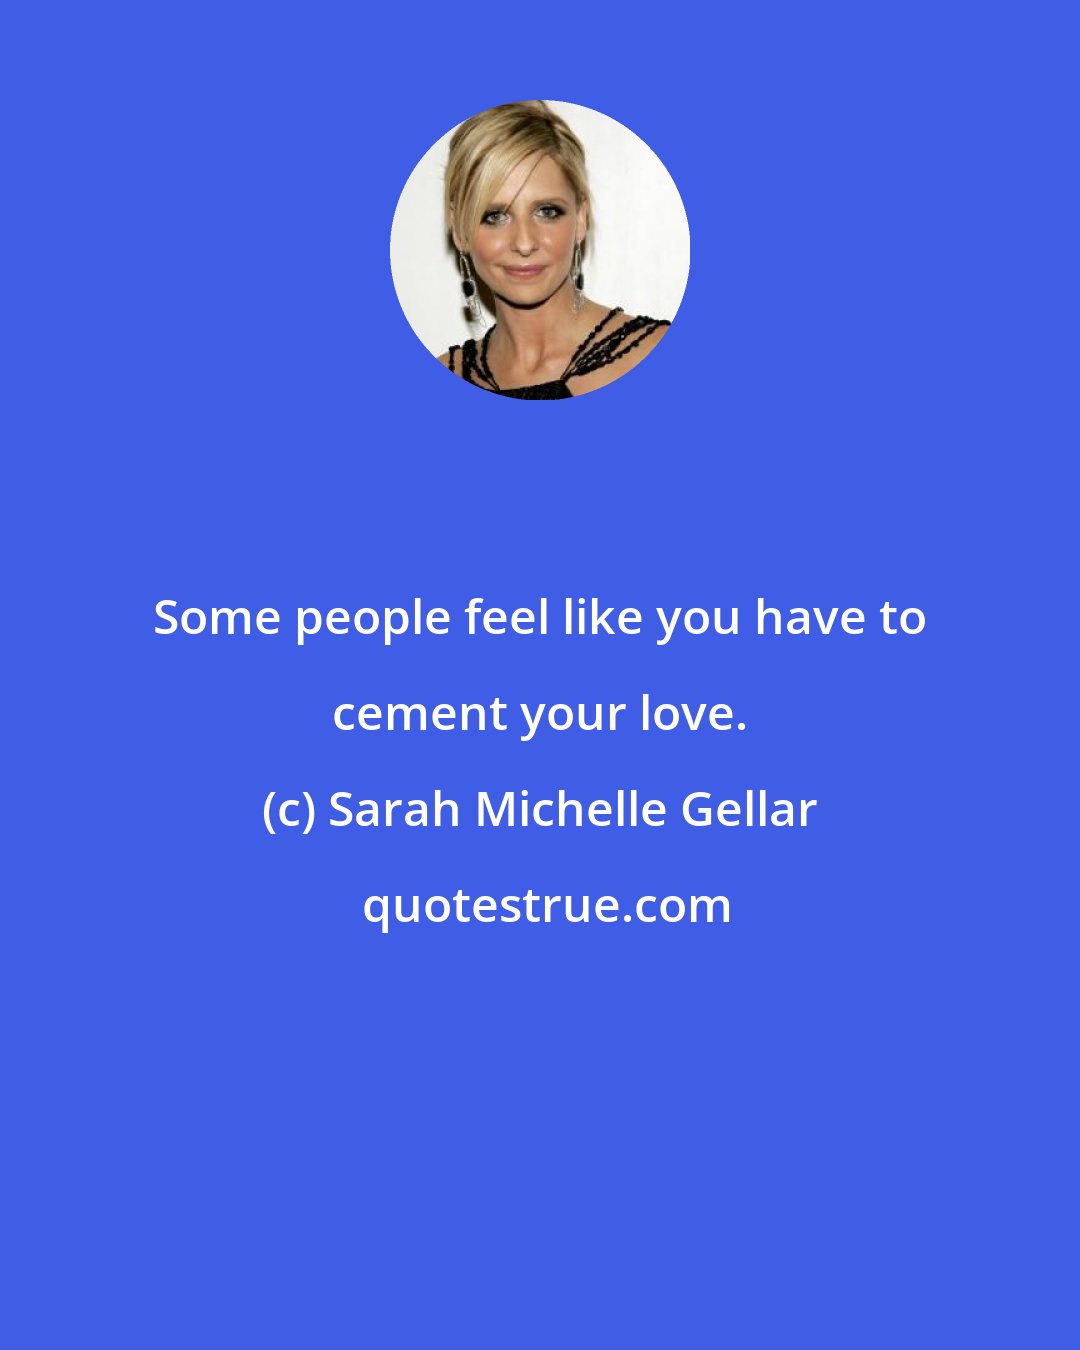 Sarah Michelle Gellar: Some people feel like you have to cement your love.